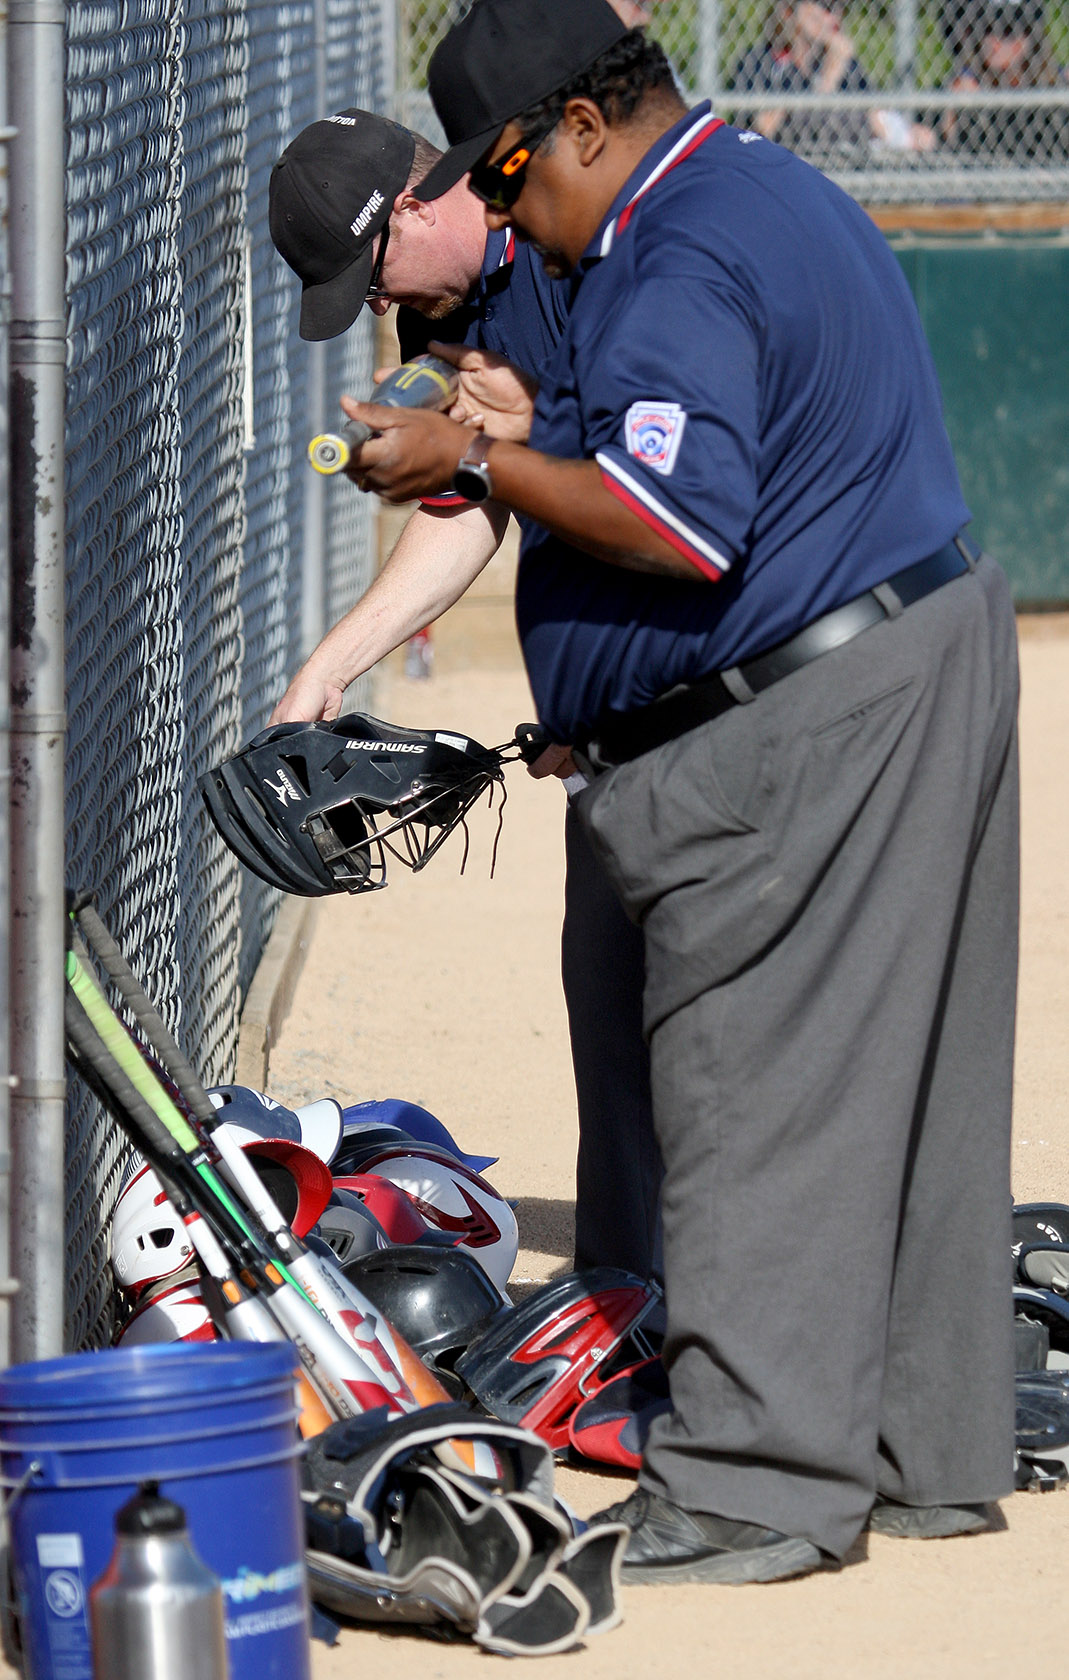 Little League umpires do their traditional pre-game equipment inspection before the game.